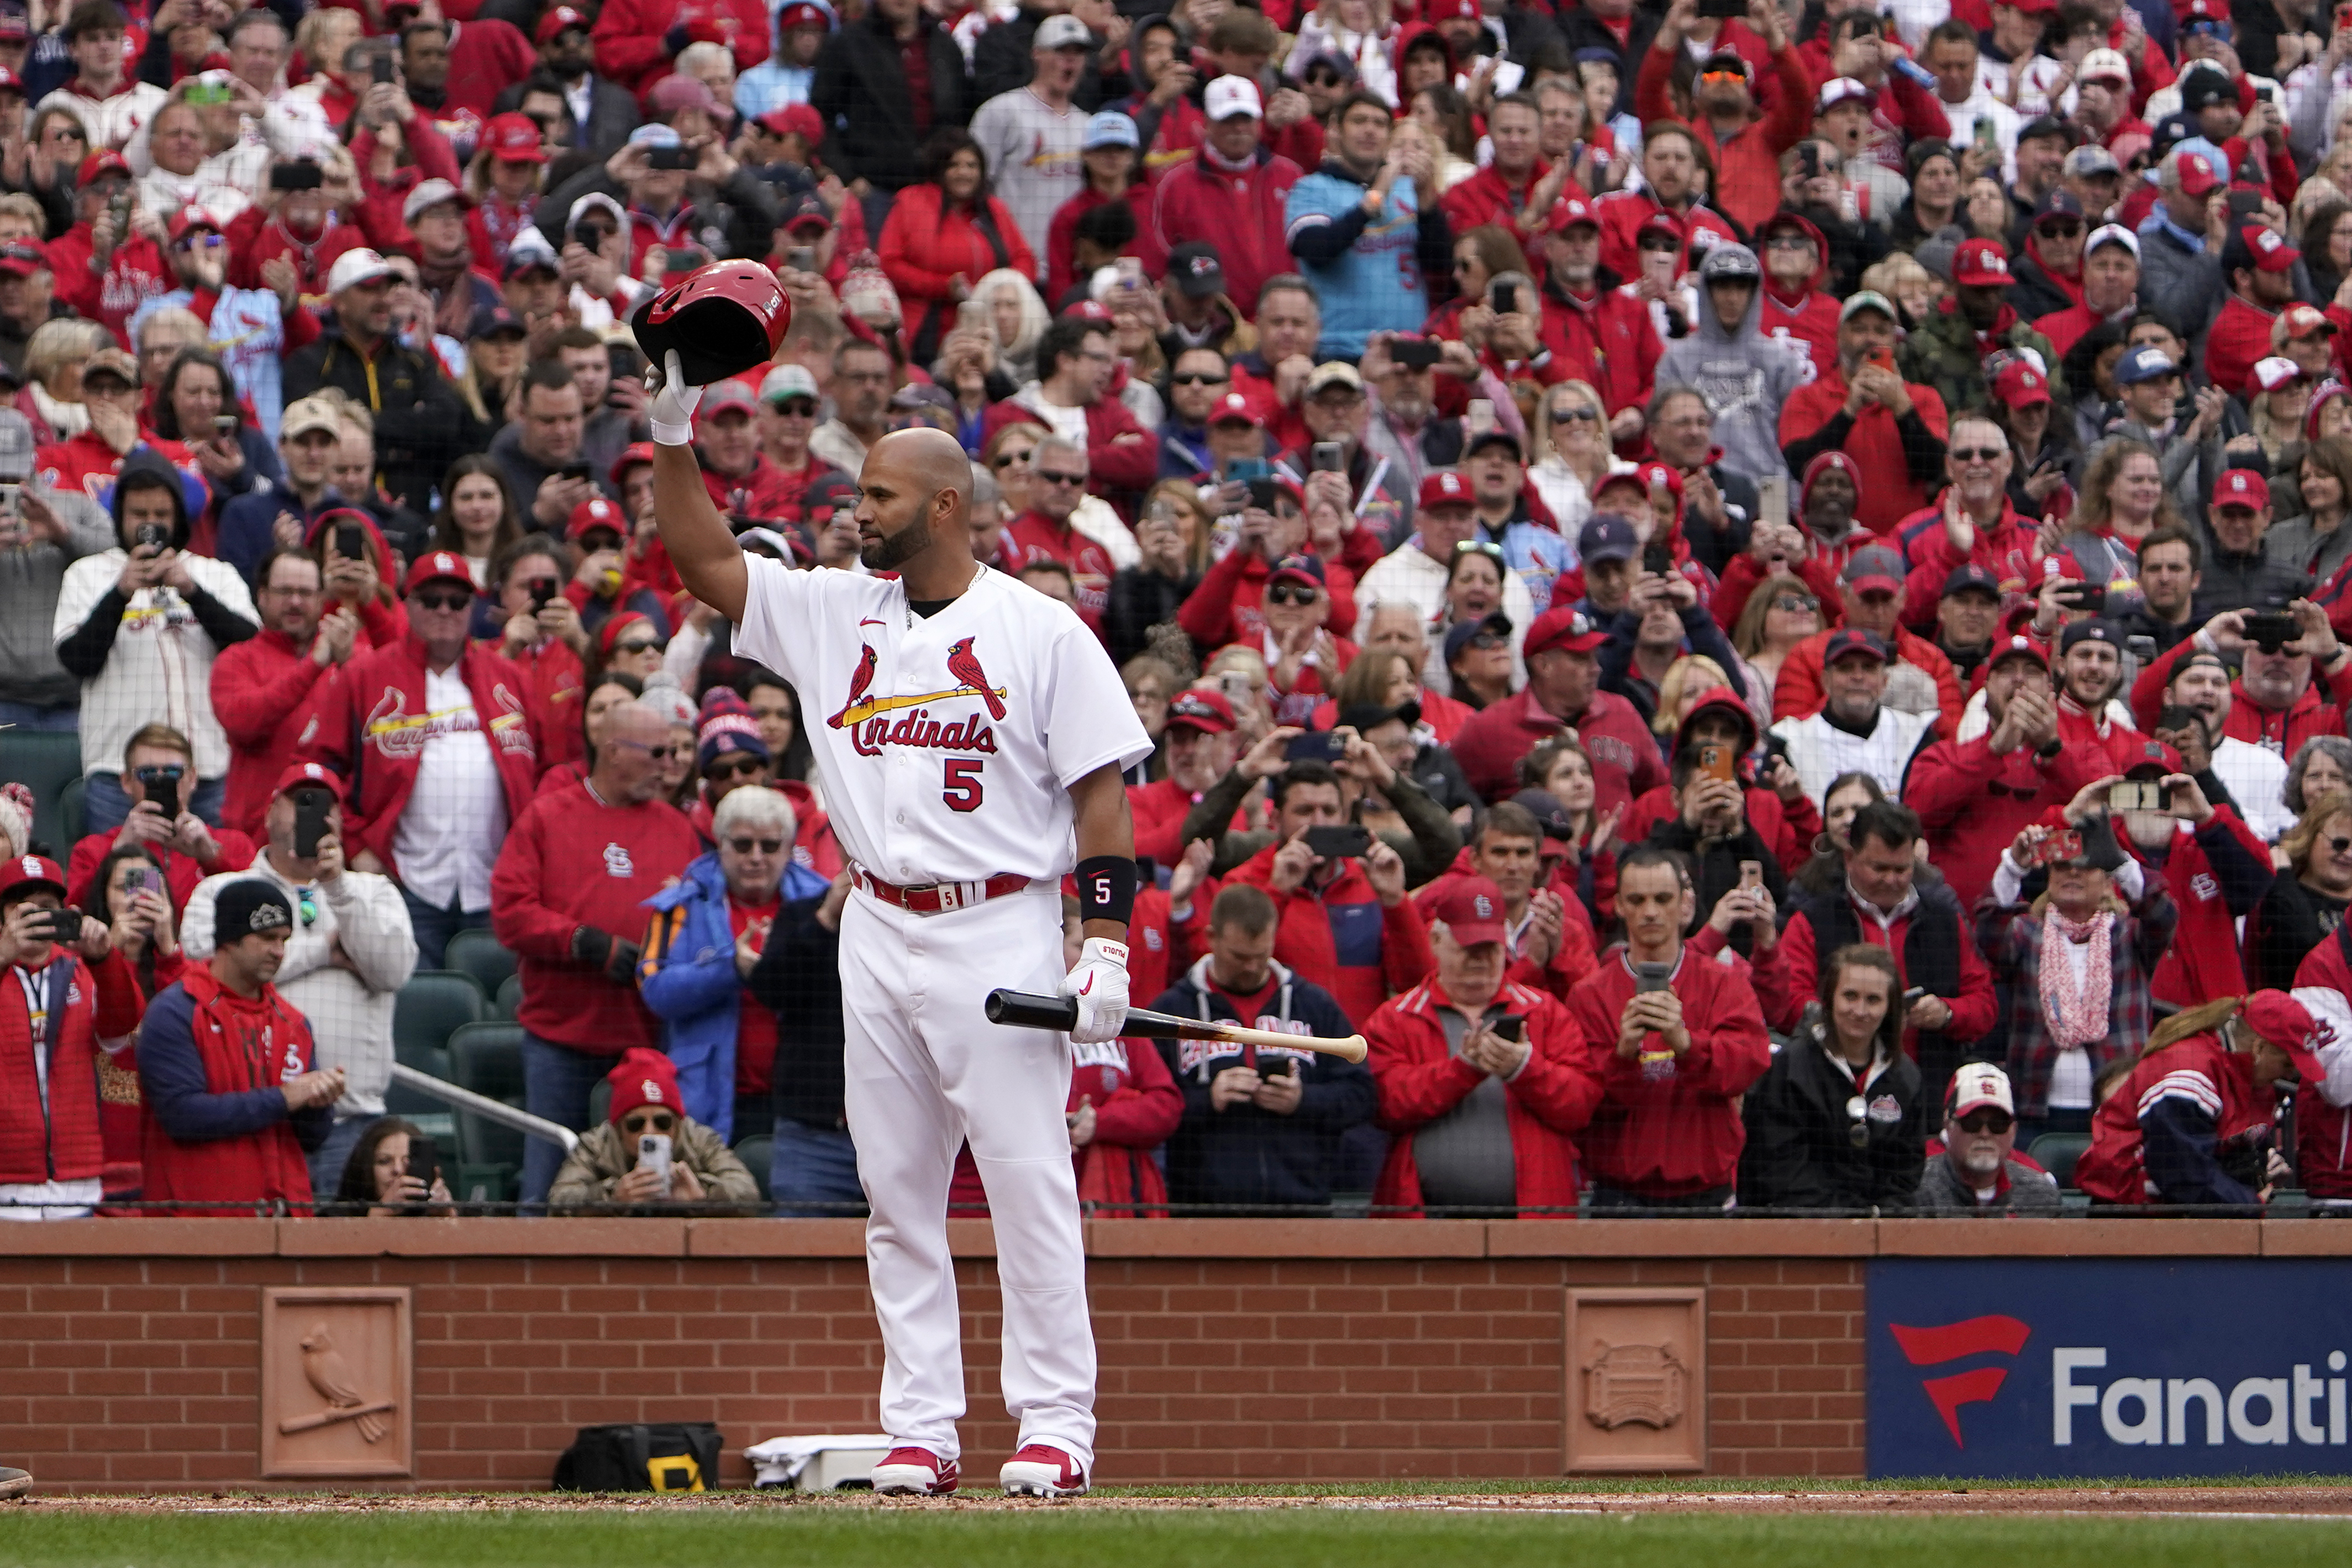 Albert Pujols named to All-Star game as legacy selection in final